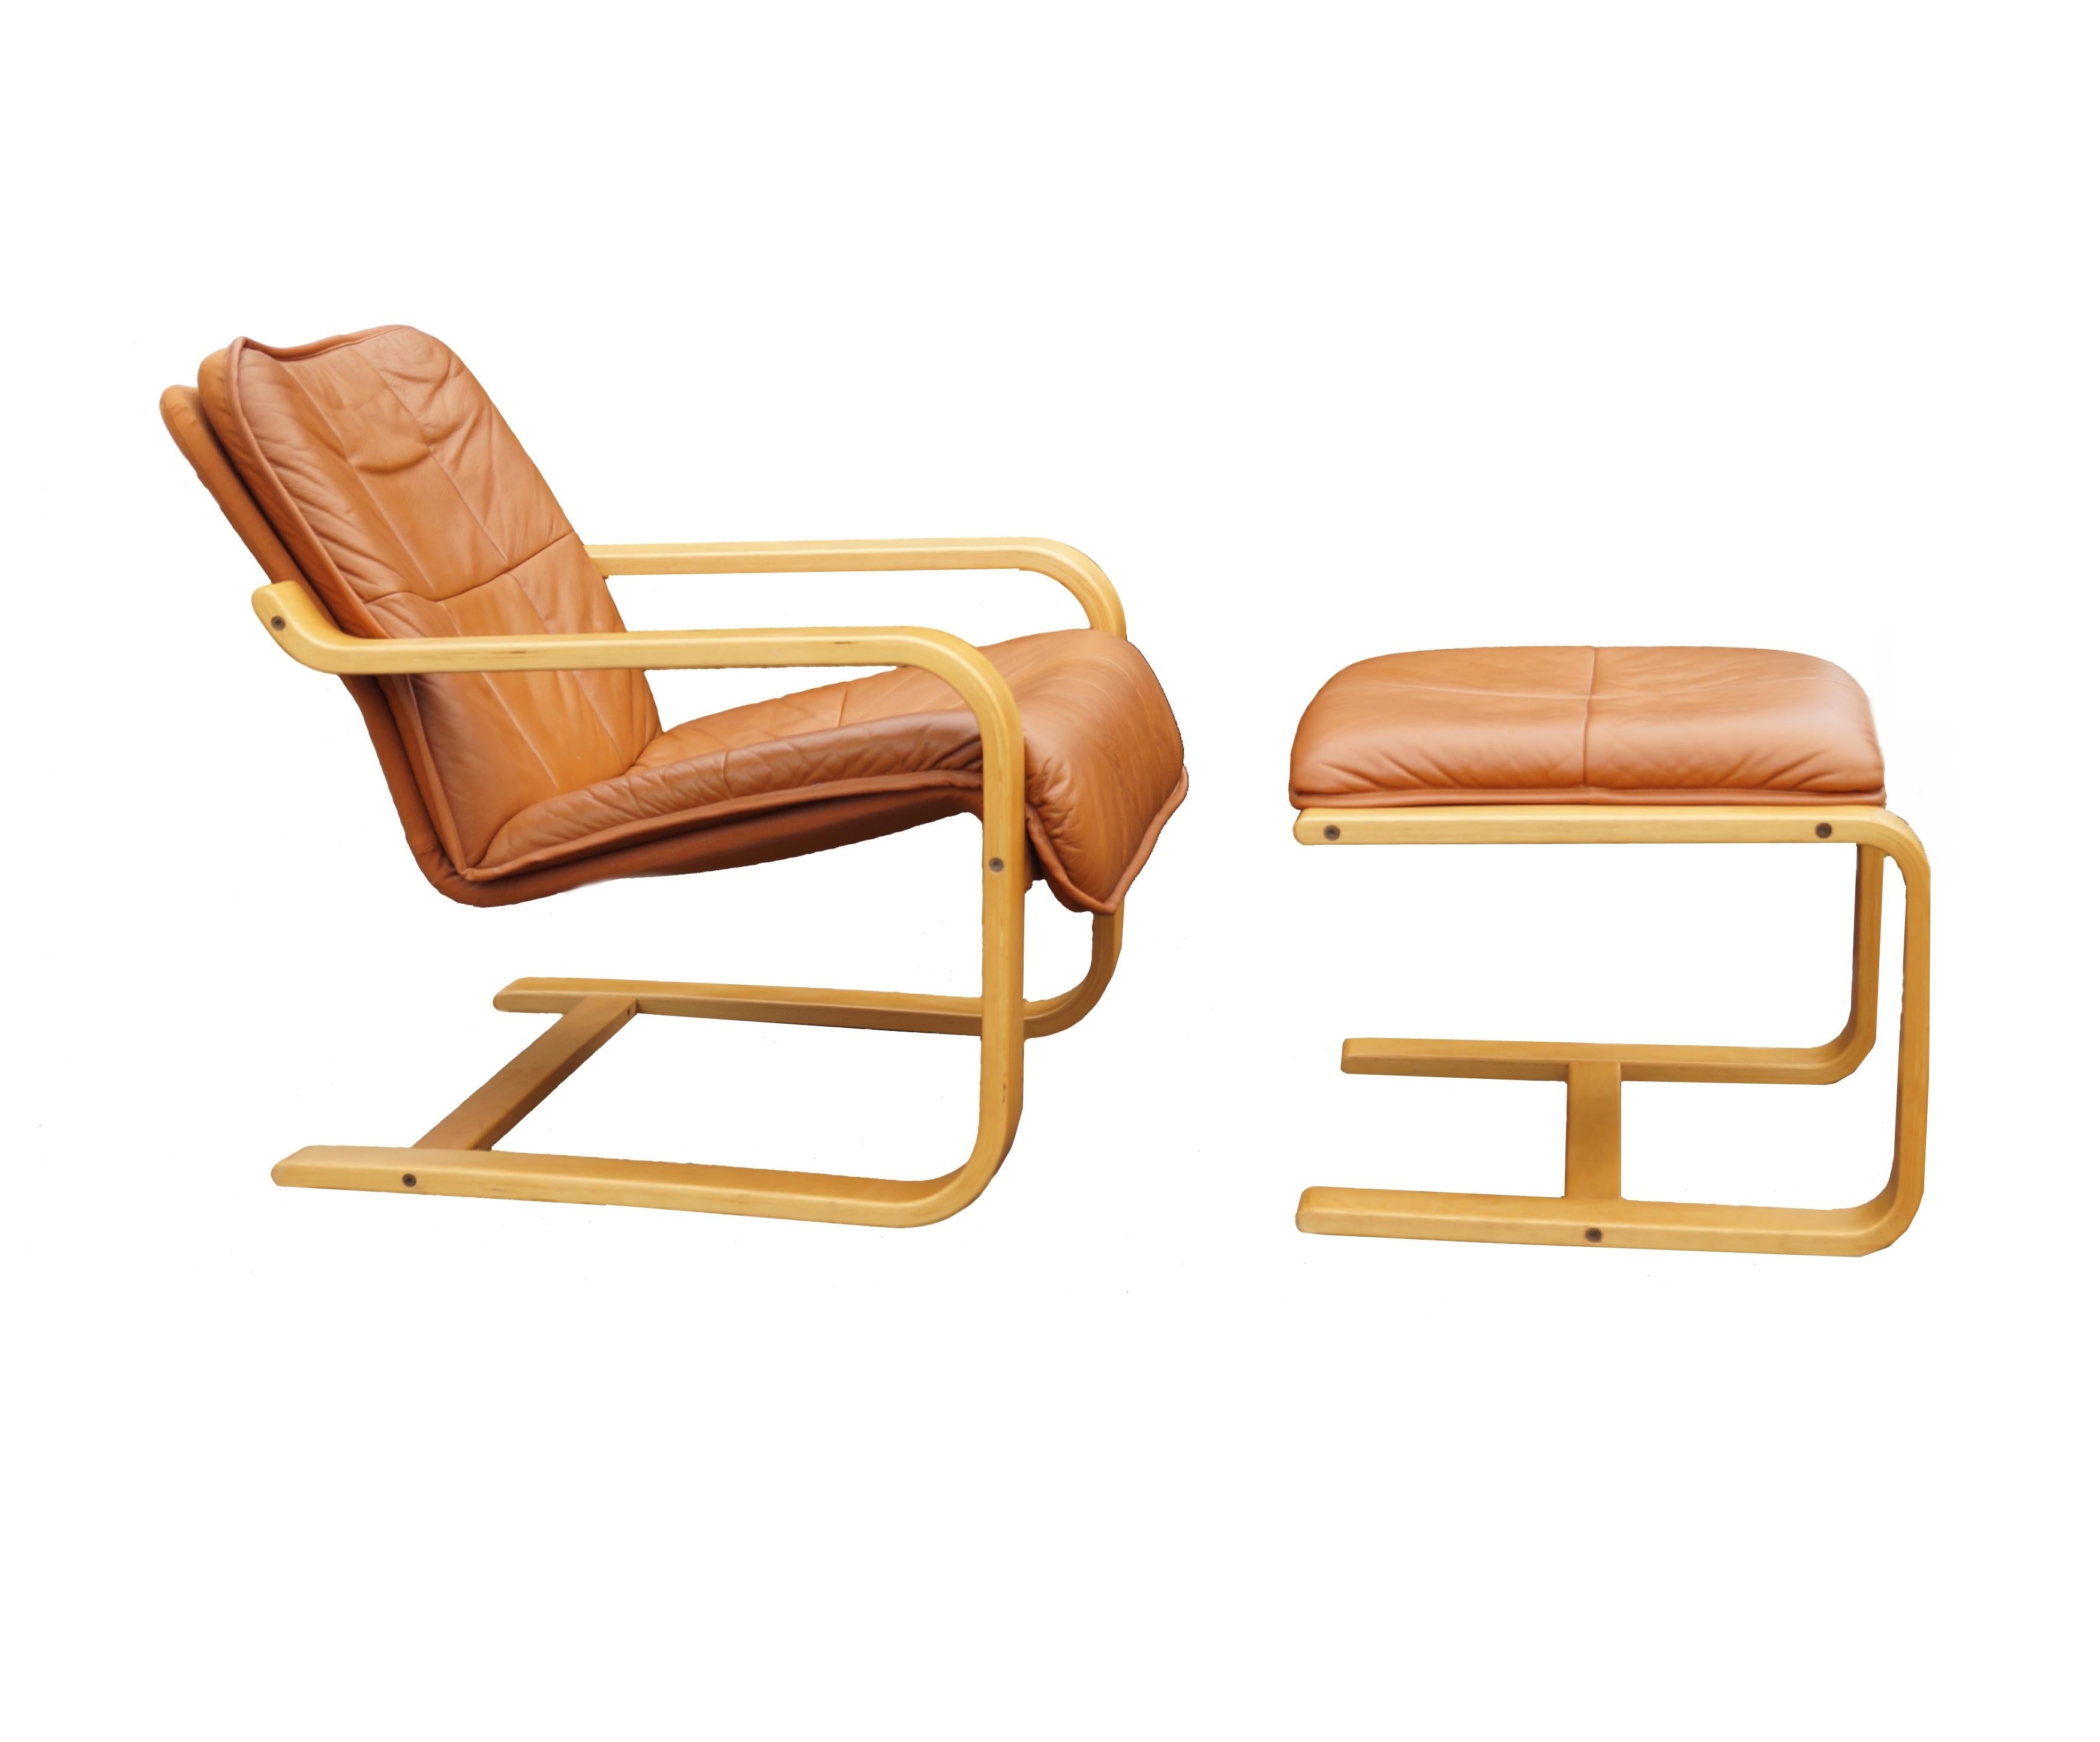 Finish leather and Bent wood Lounge Chair & Ottoman Mid-Century Modern by OY BJ Dahlqvist AB Finland . The ottoman measures 17